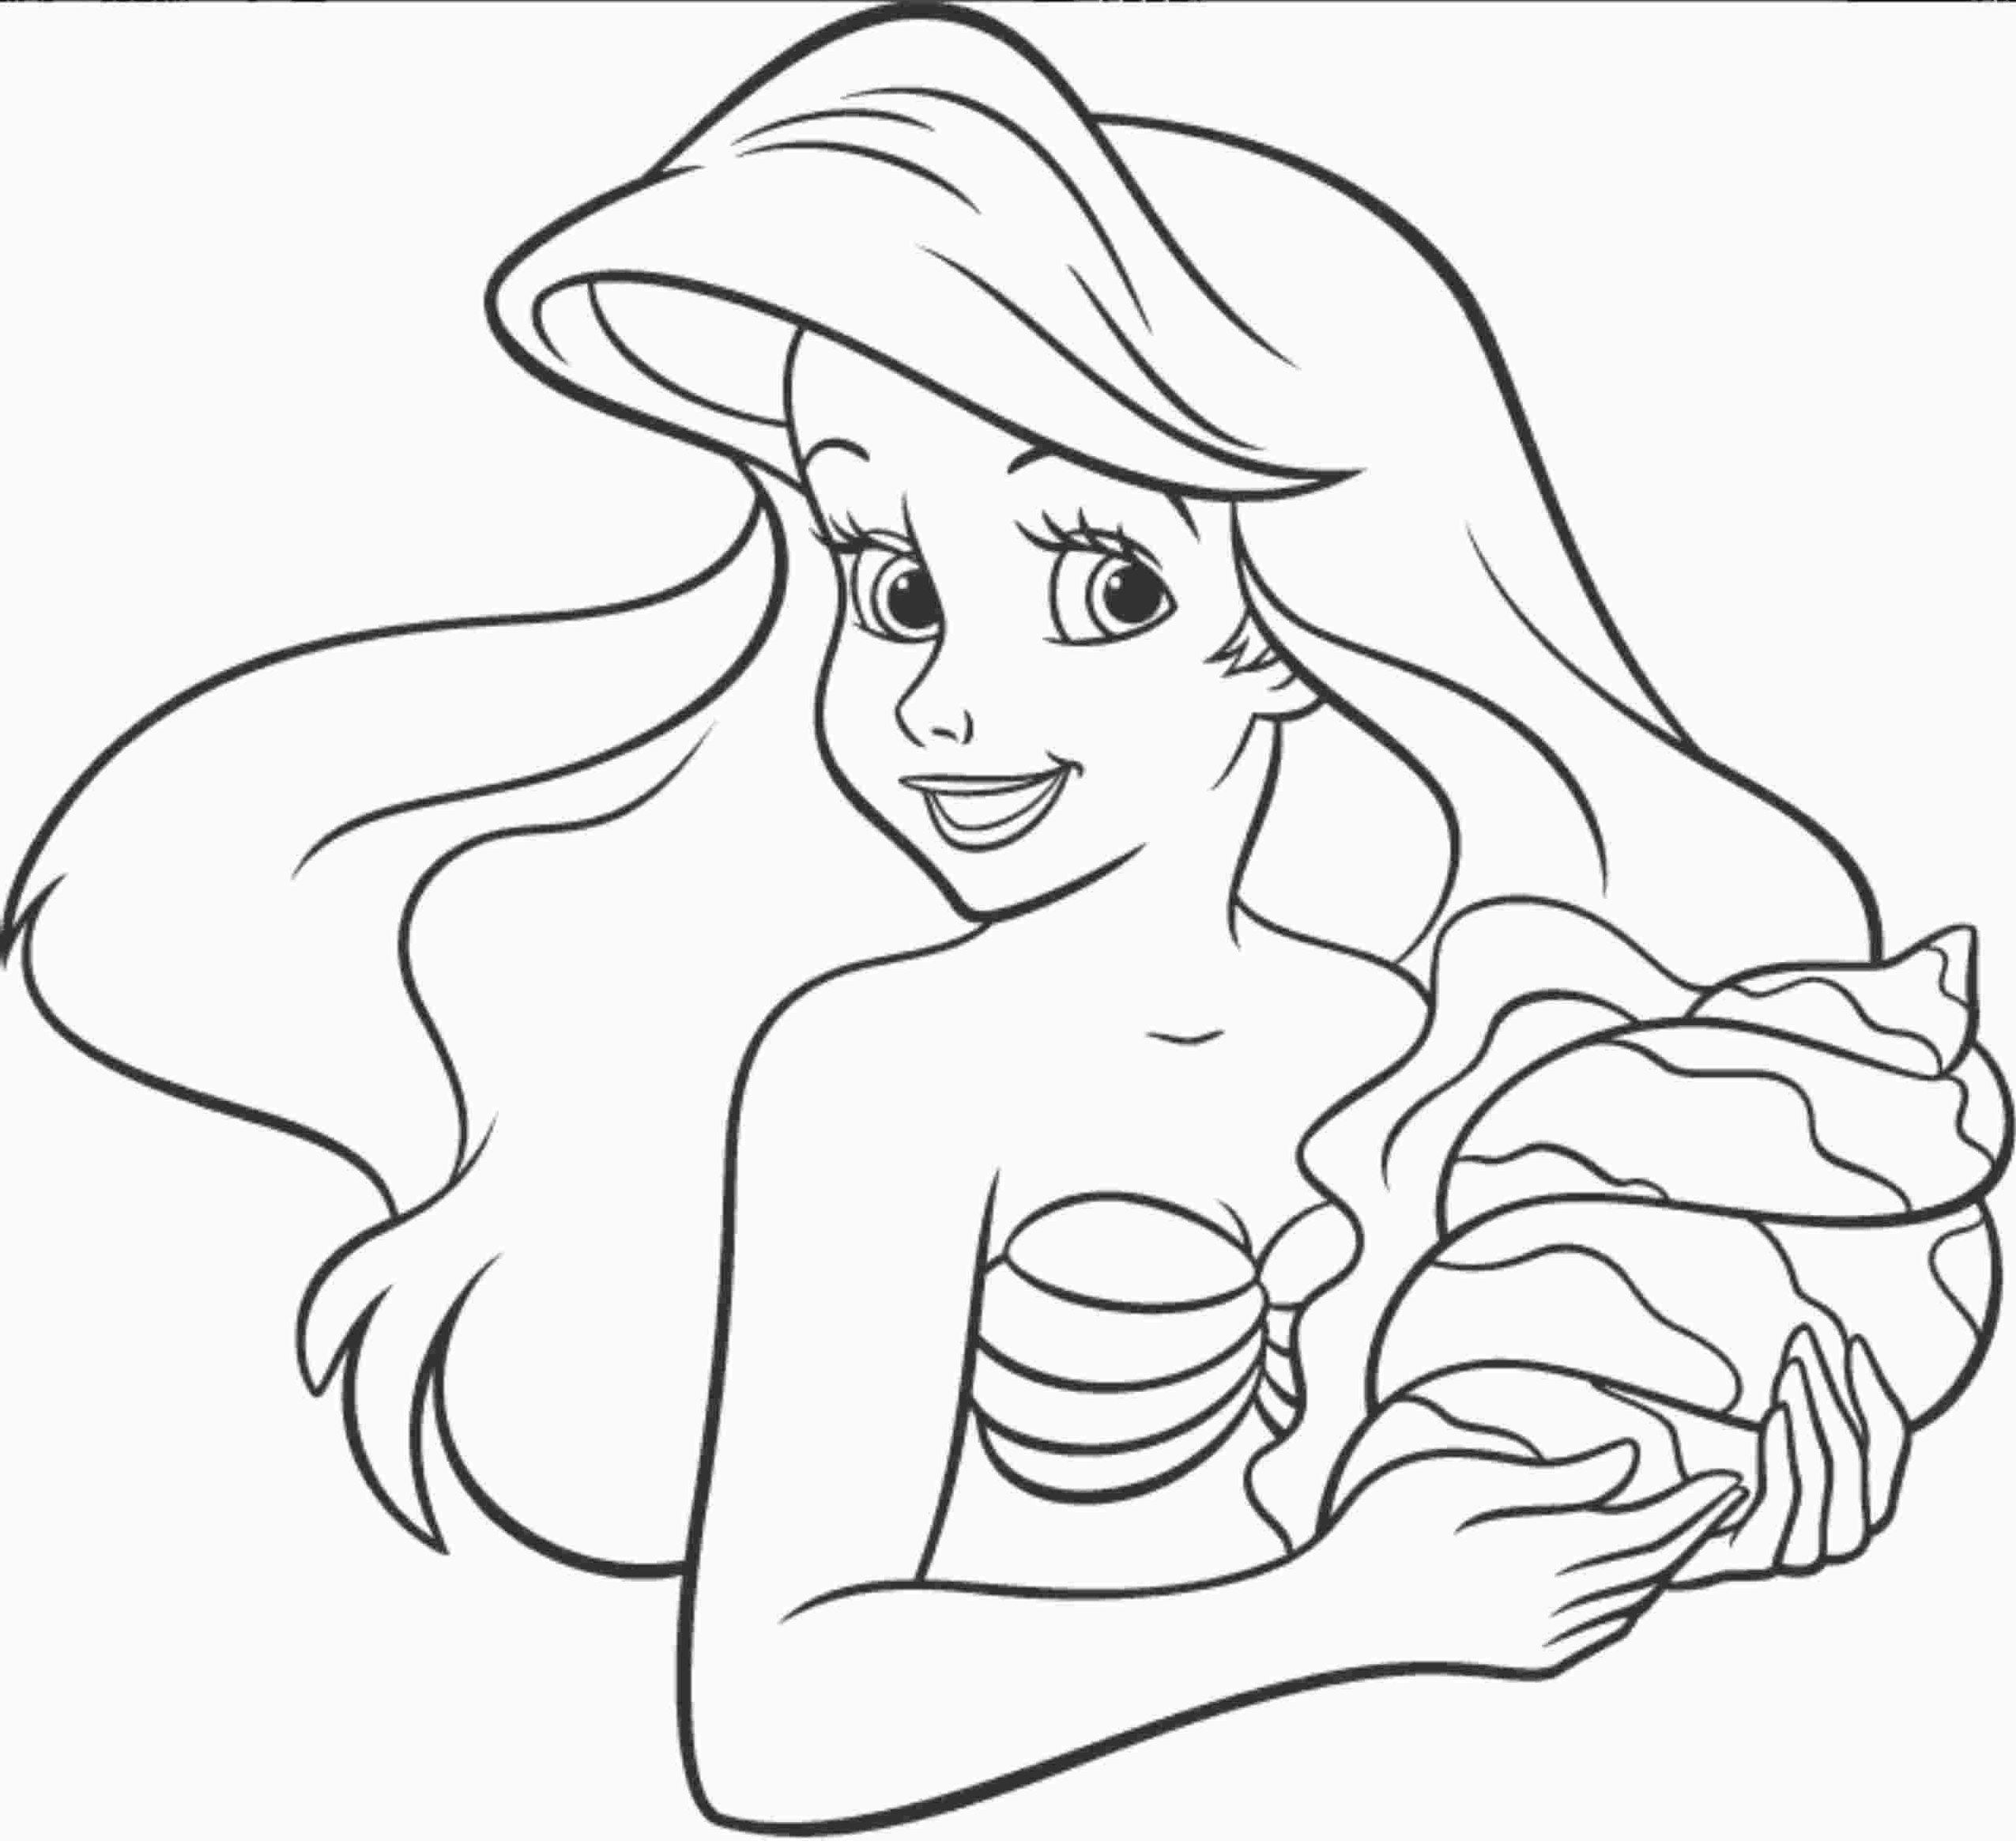 ursula-little-mermaid-coloring-pages-coloring-home